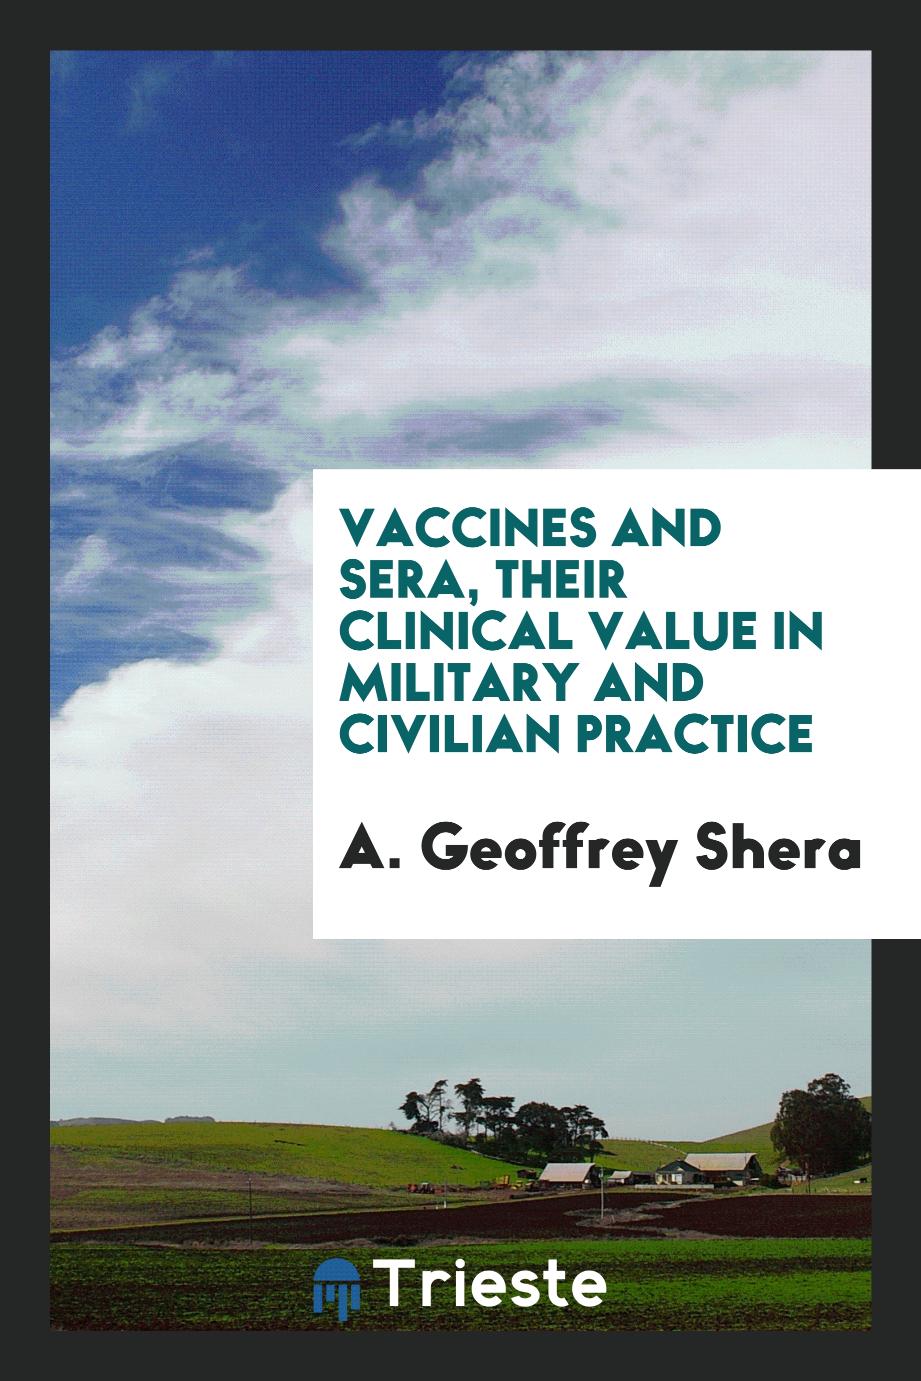 Vaccines and sera, their clinical value in military and civilian practice